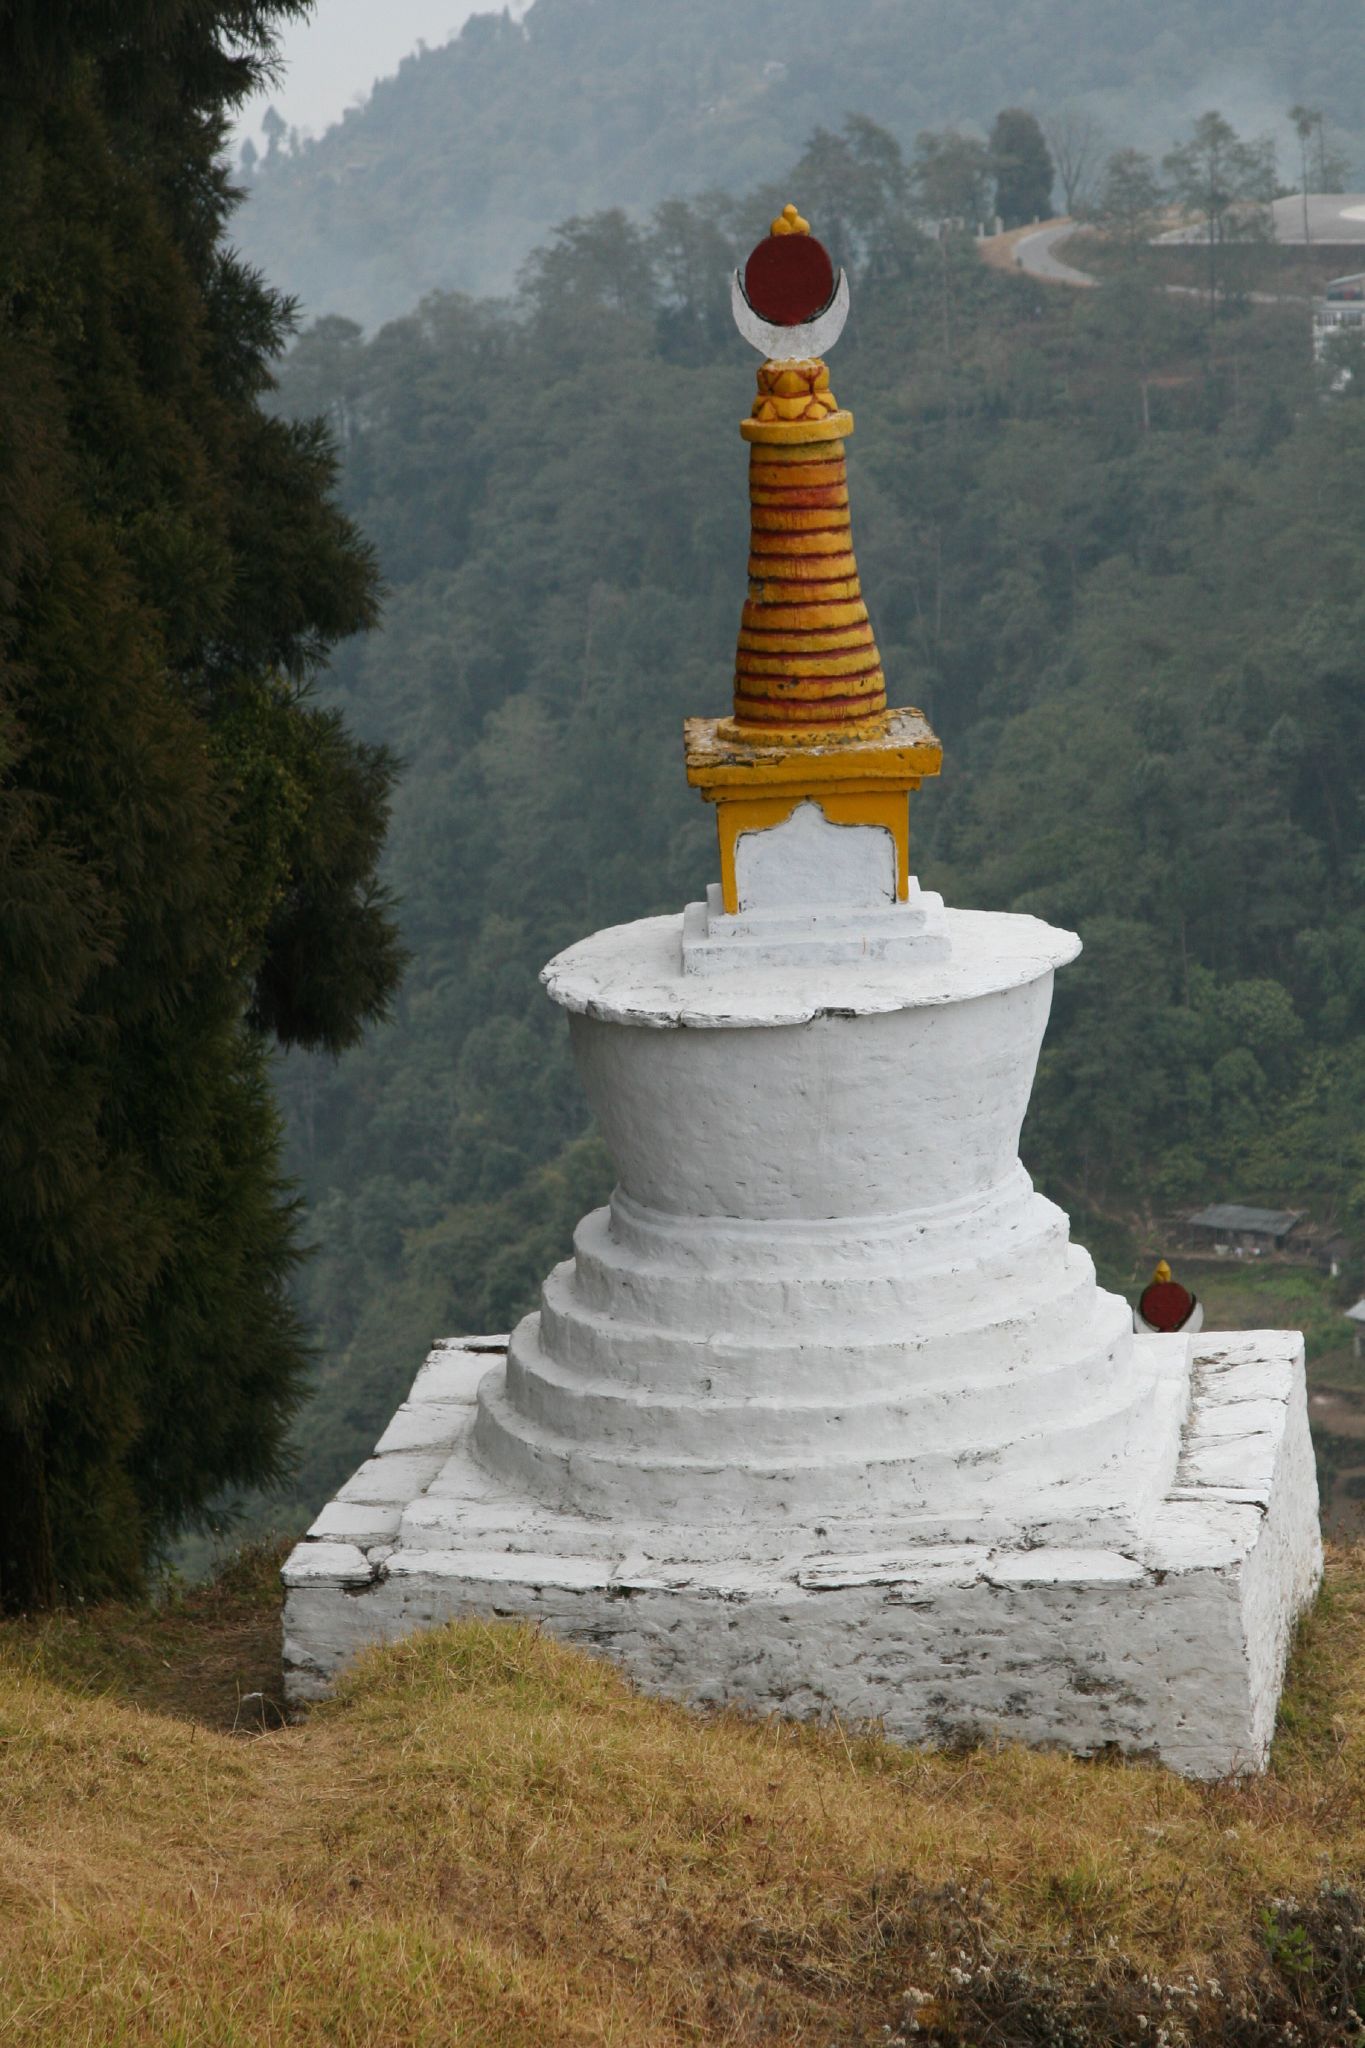 a buddhist temple on the side of a hill